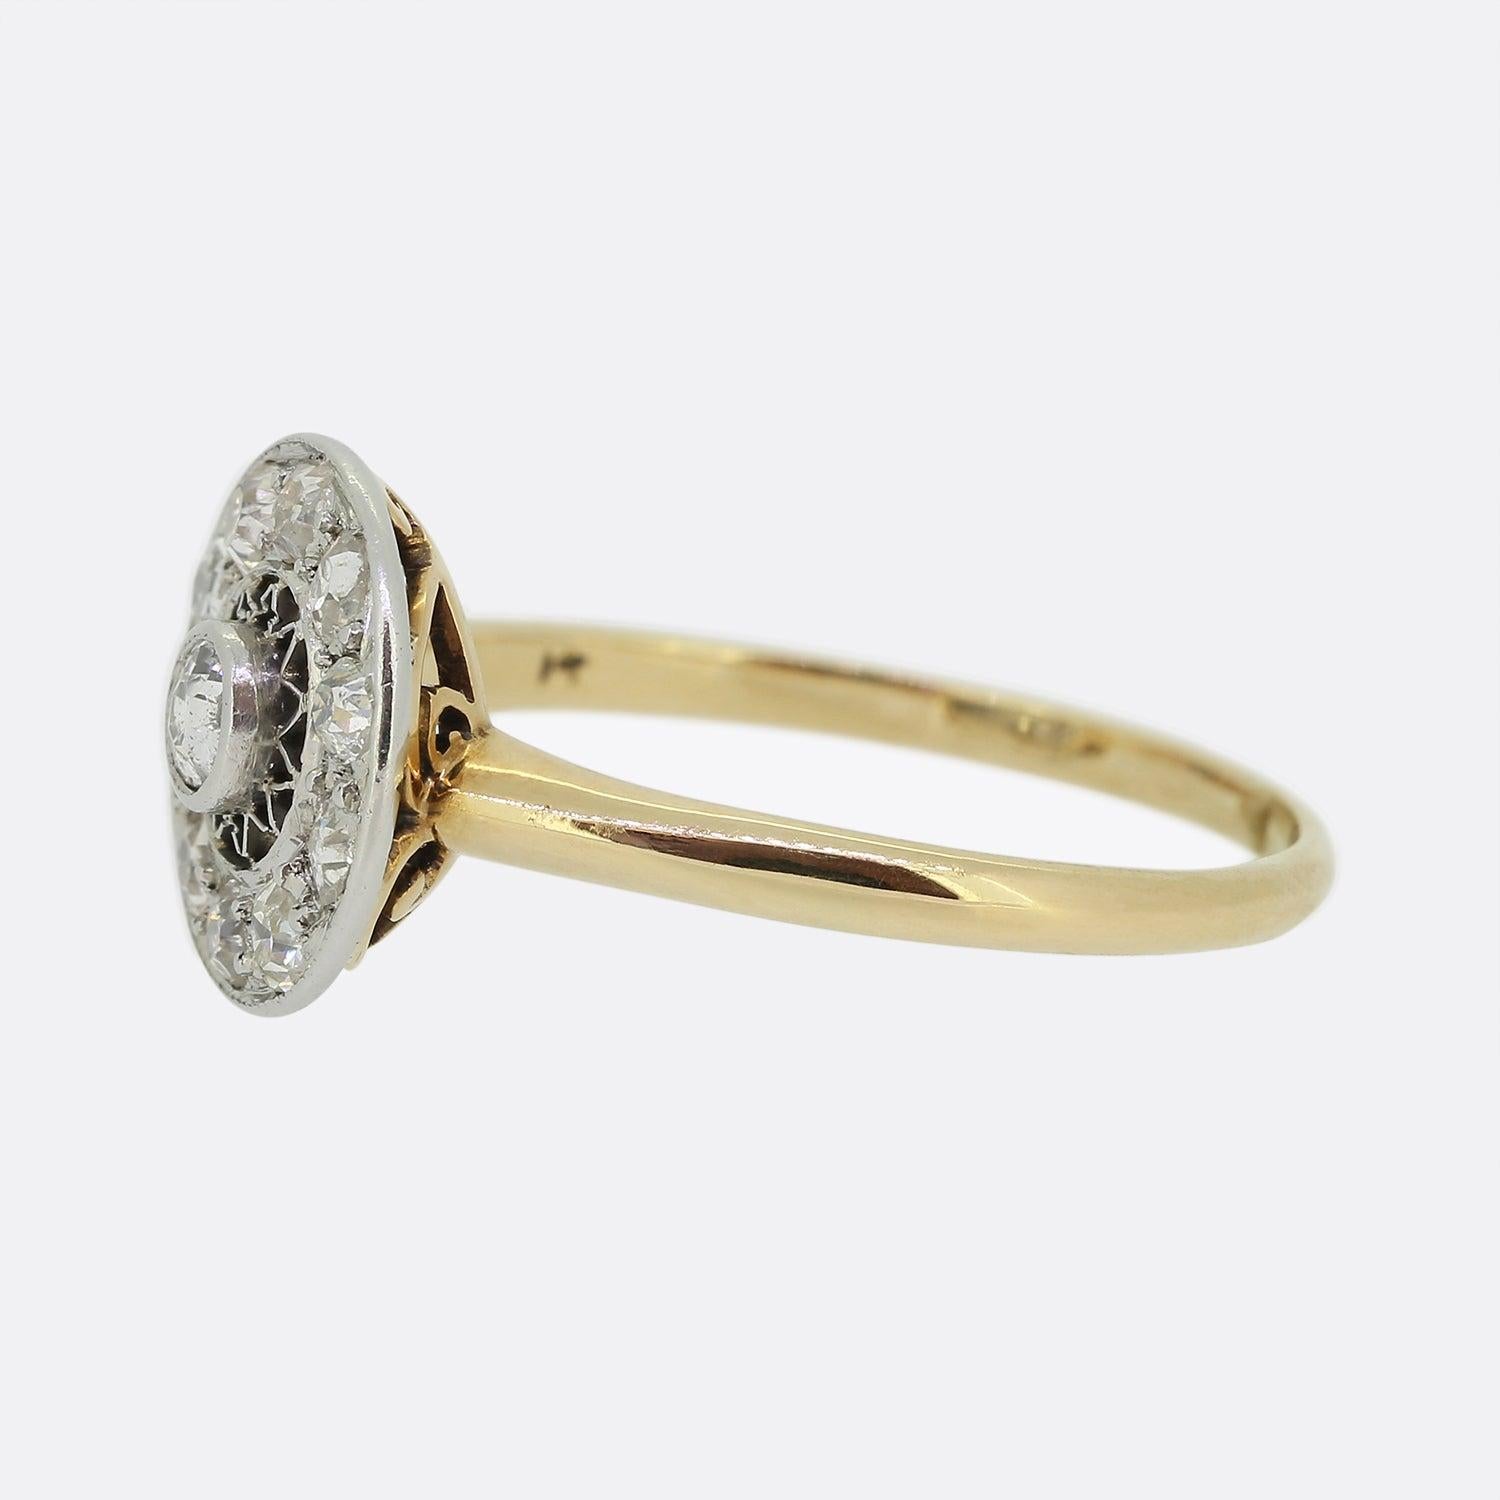 Here we have a wonderful diamond cluster ring from the Edwardian era. This piece features a centralised rub-over set round old cut diamond that is surrounded by an open sunburst geometric design. Fine platinum milgrain detailing flows around the